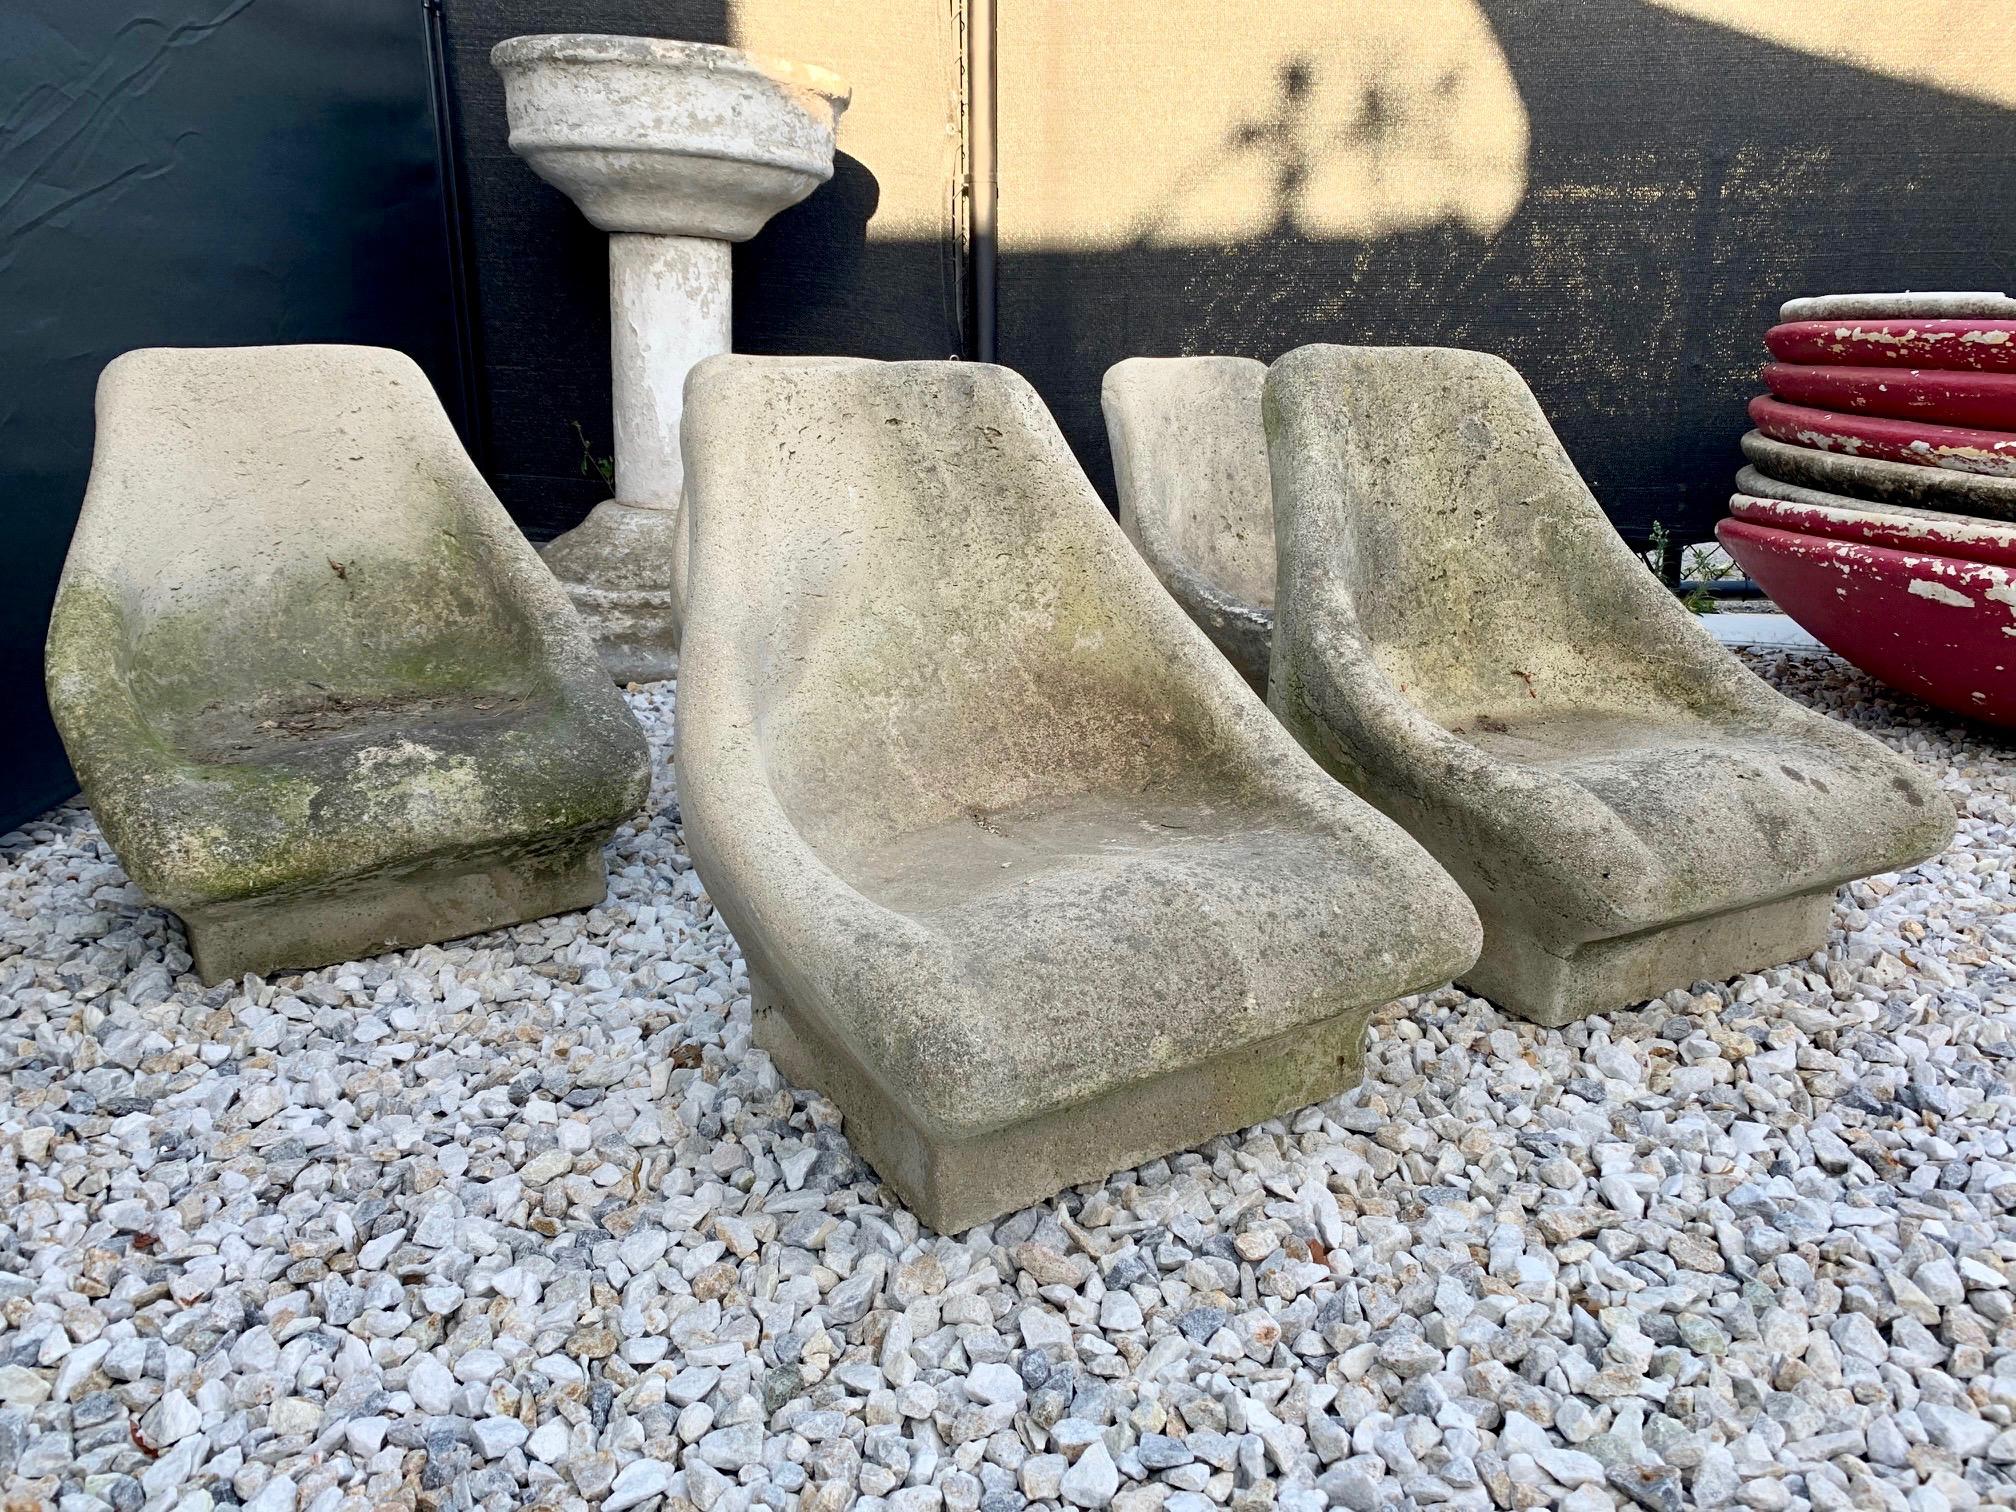 Unusual set of 5 cast concrete chairs. Originally purchased in Los Angeles in the 1980s. Low profile and surprisingly comfortable. Once used around a sunken fire pit. Good patina and coloring. Very sturdy chairs, approximately 200 pounds each. 

3